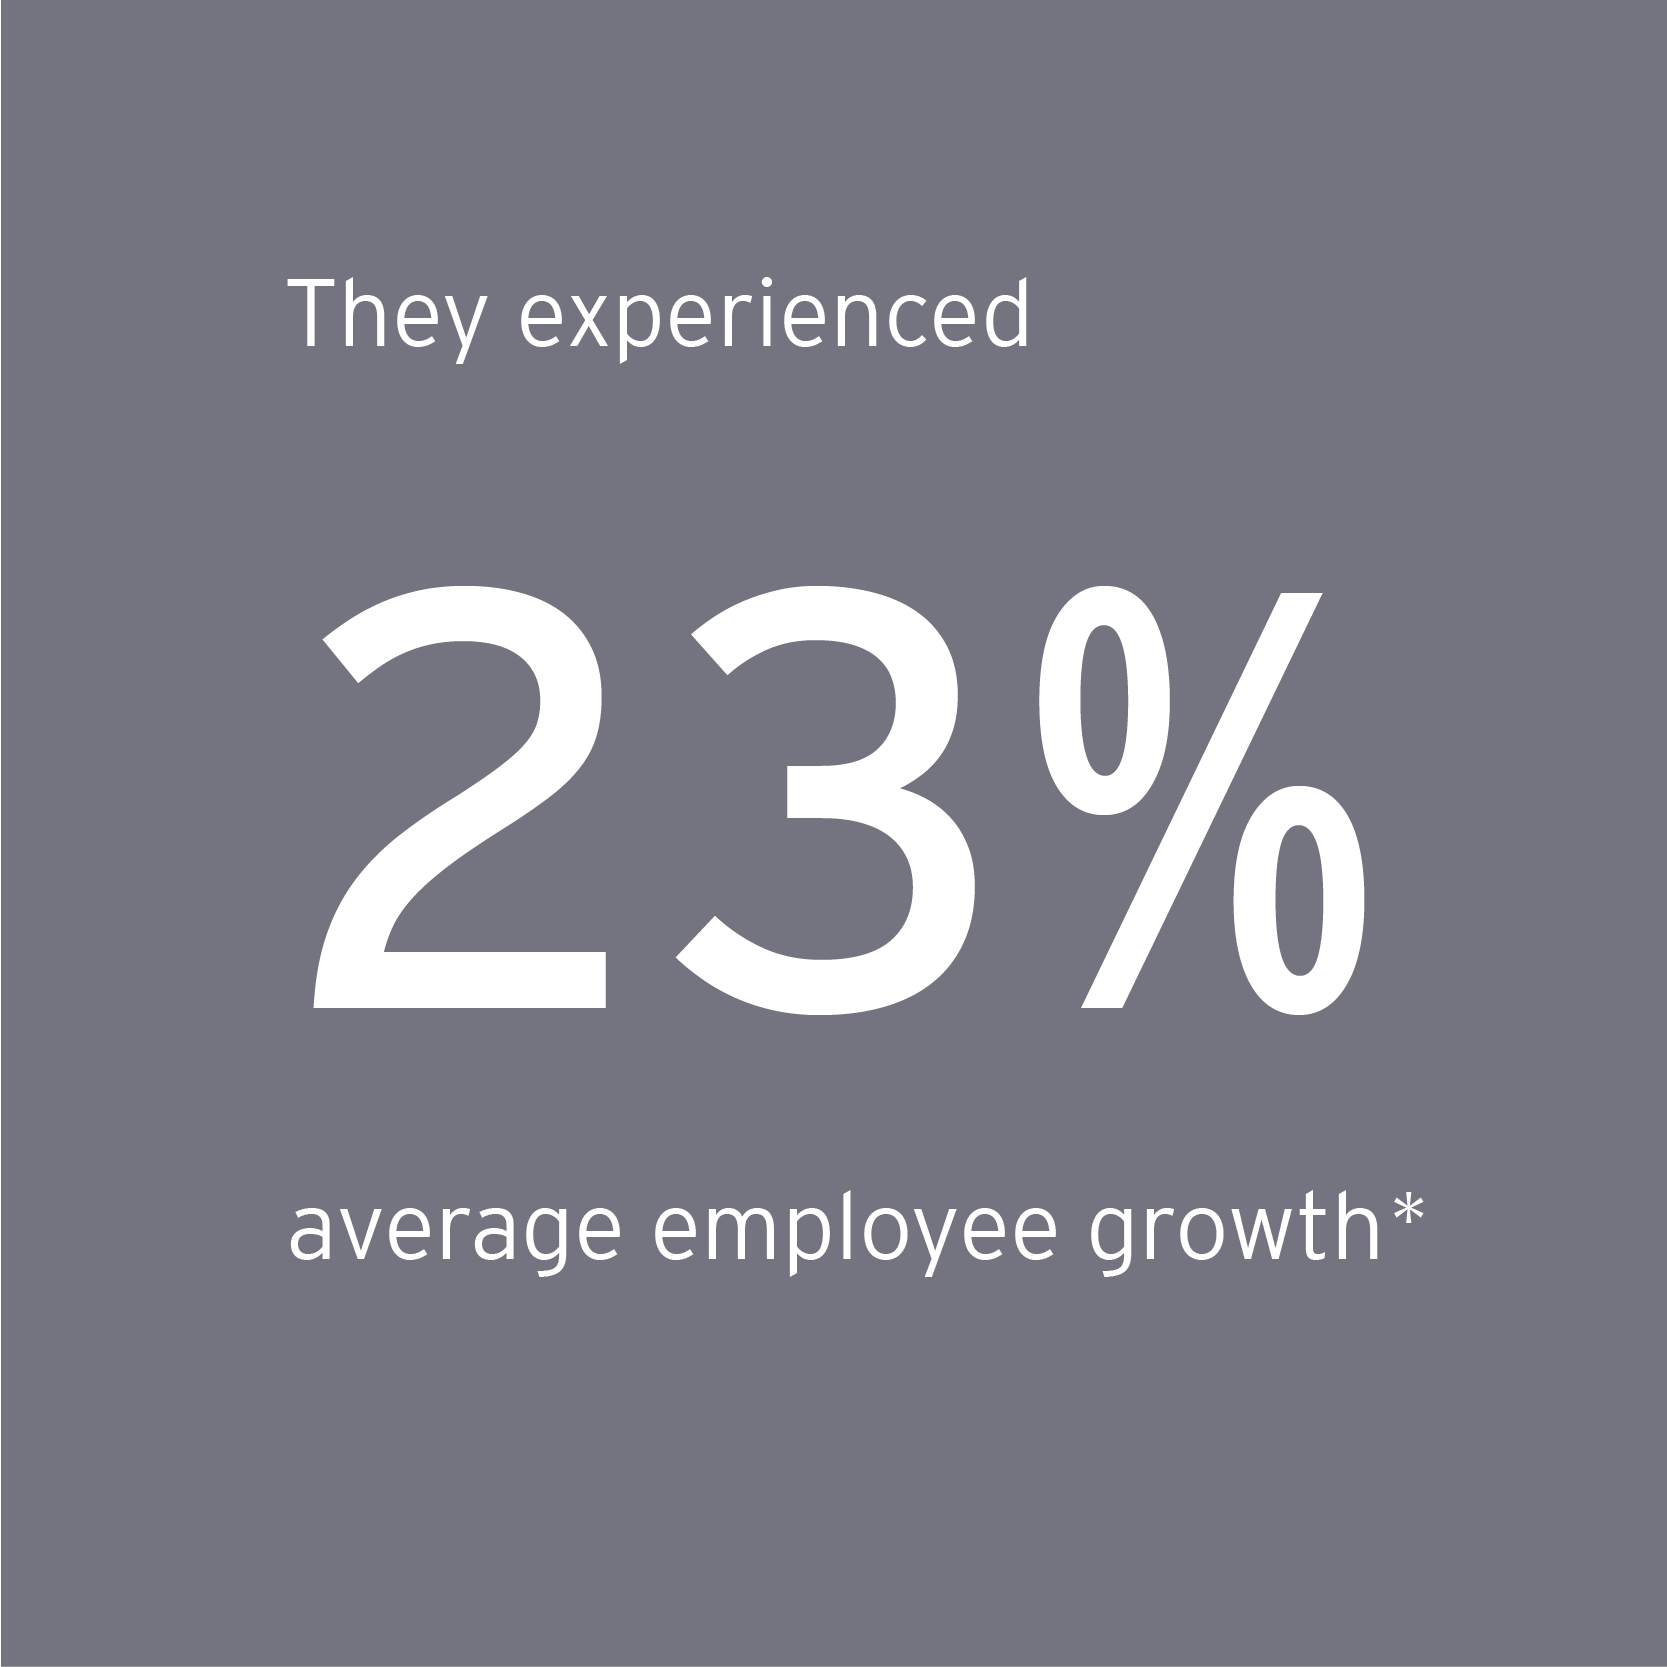 They experienced 23% average employee growth